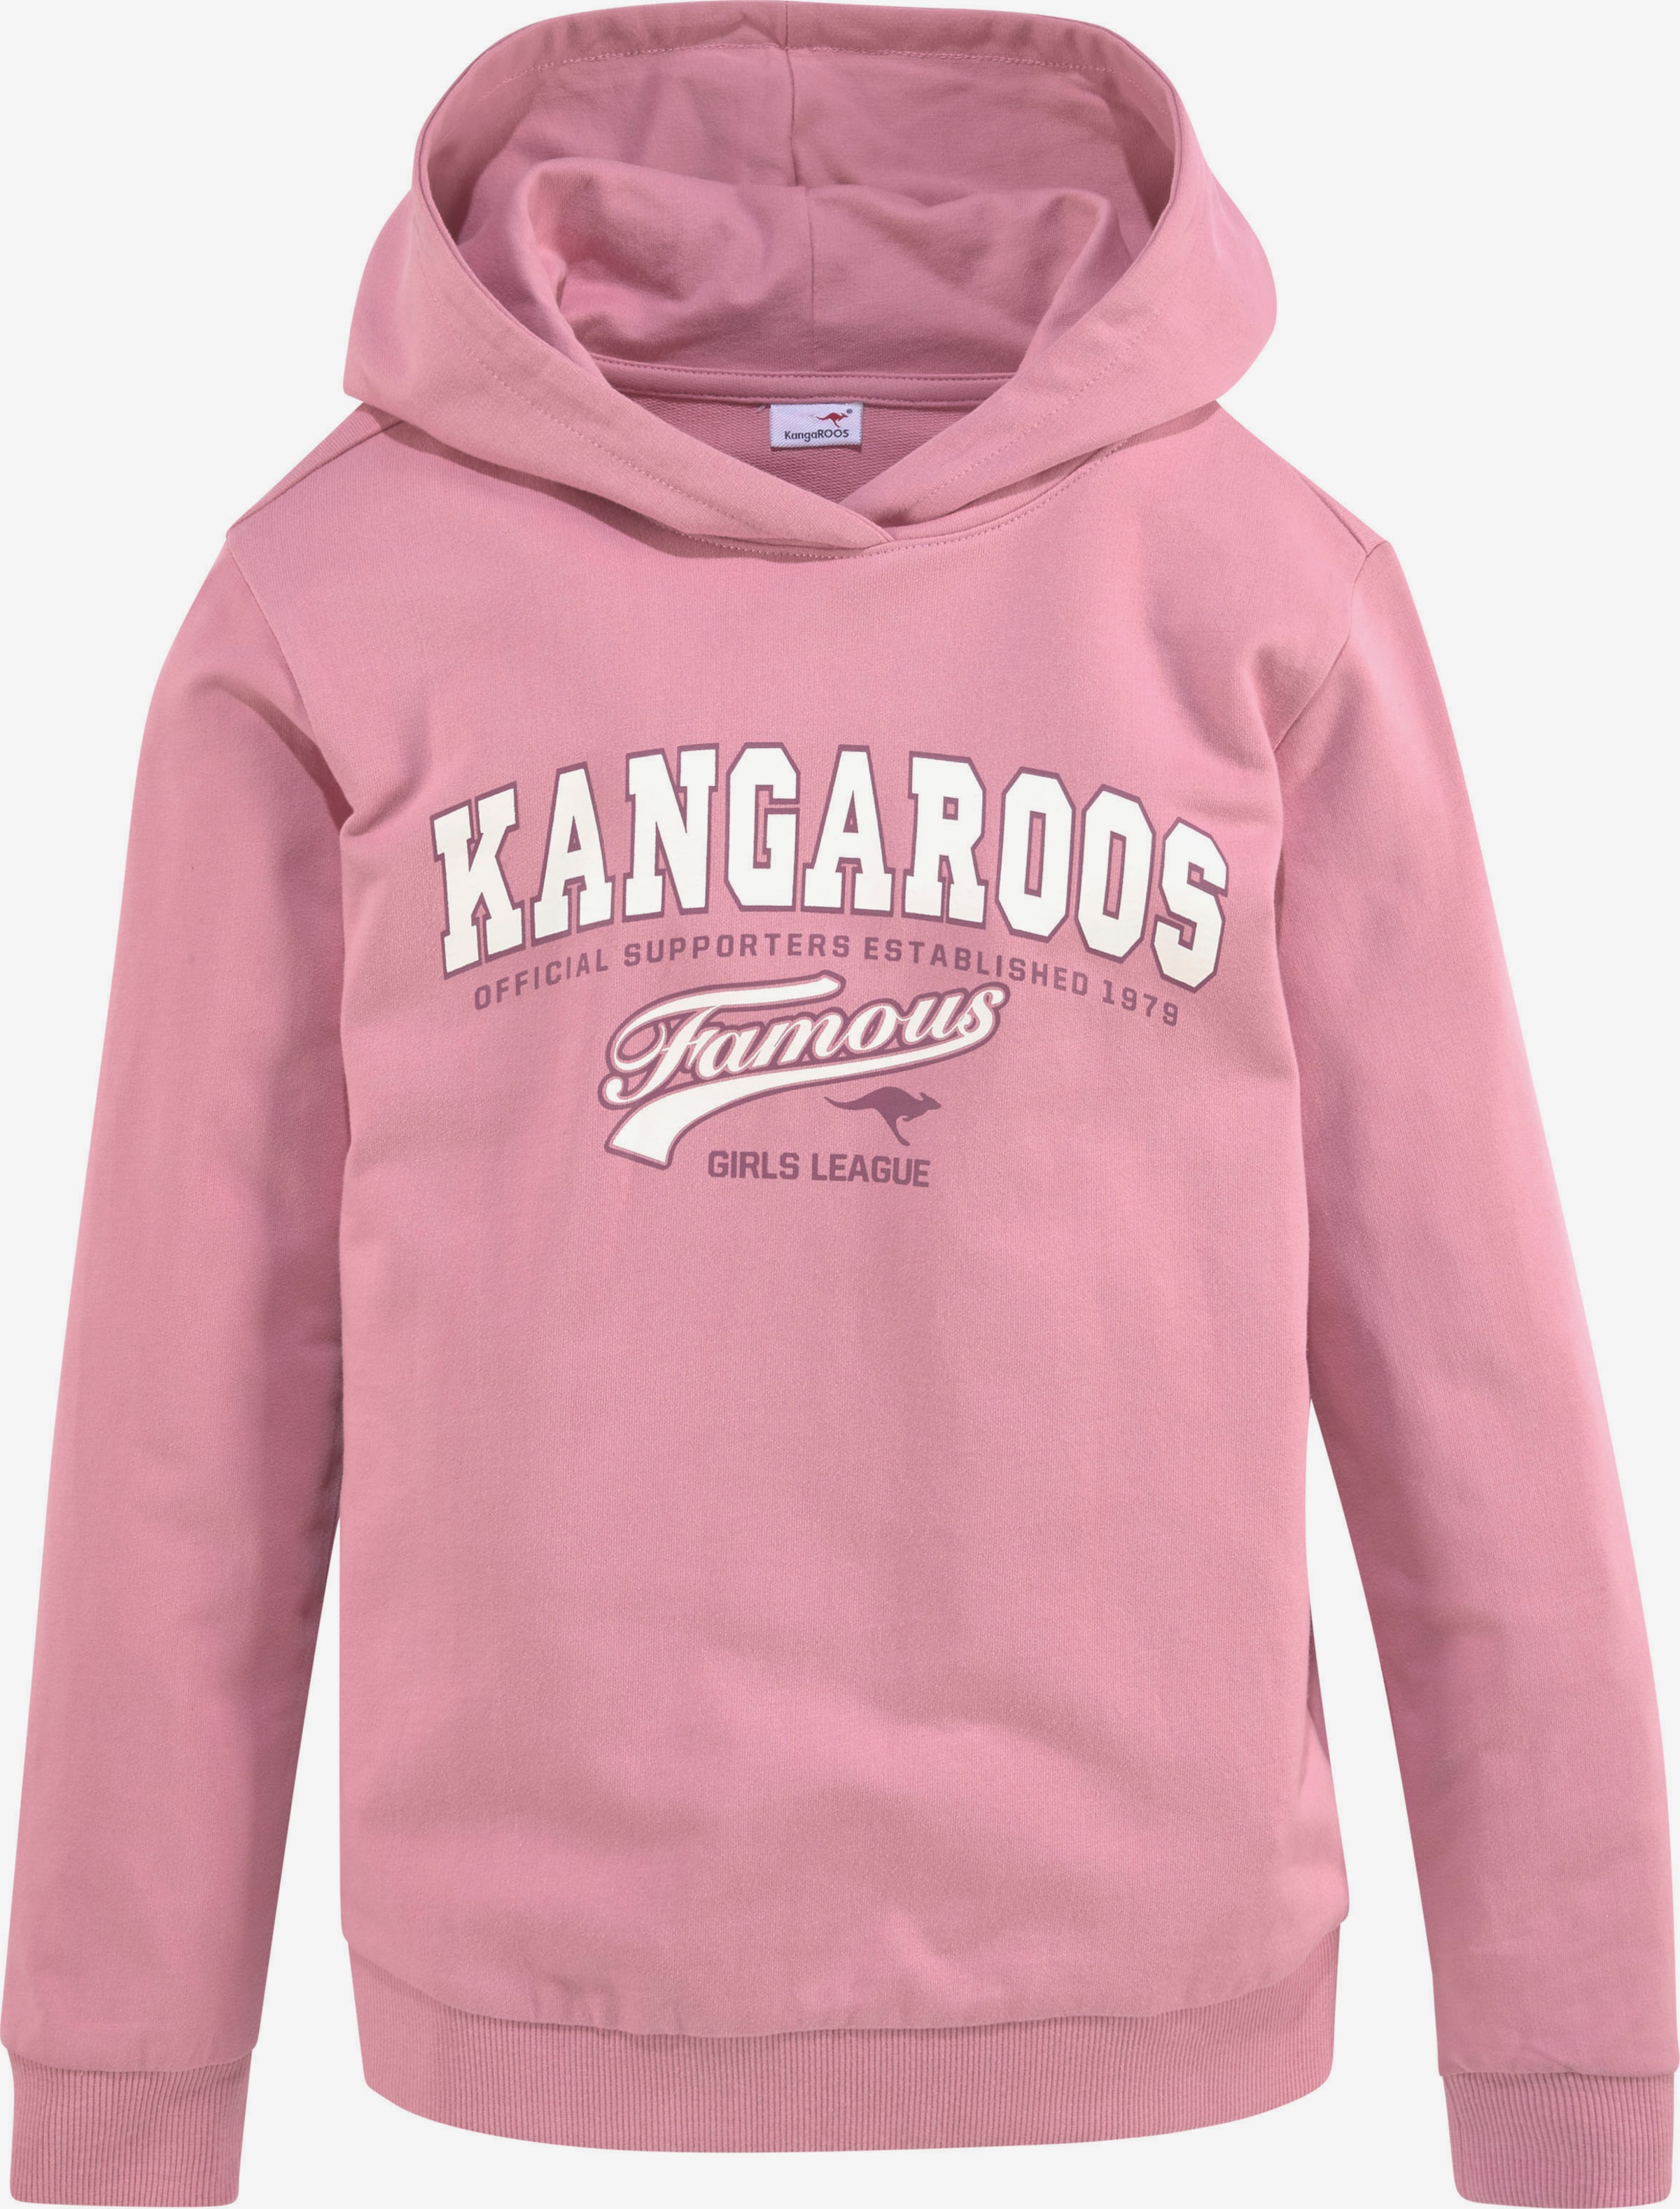 YOU Dusky | Sweatsuit in ABOUT KangaROOS Pink